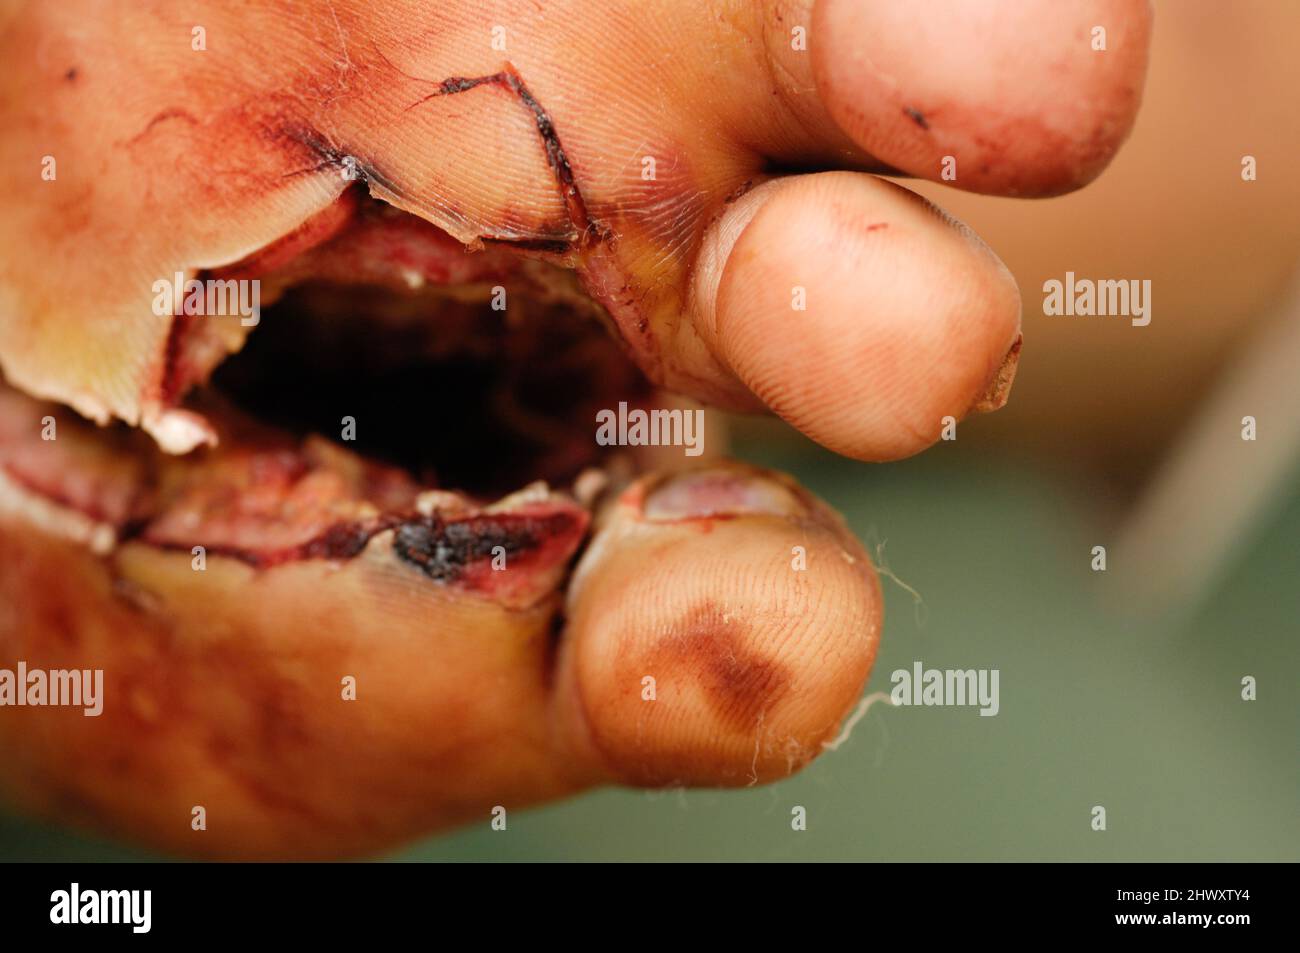 A patient with diabetes suffering with a septic foot. Unregulated hyperglycaemia (high blood glucose levels) leads to non-enzymic glycation of protein Stock Photo